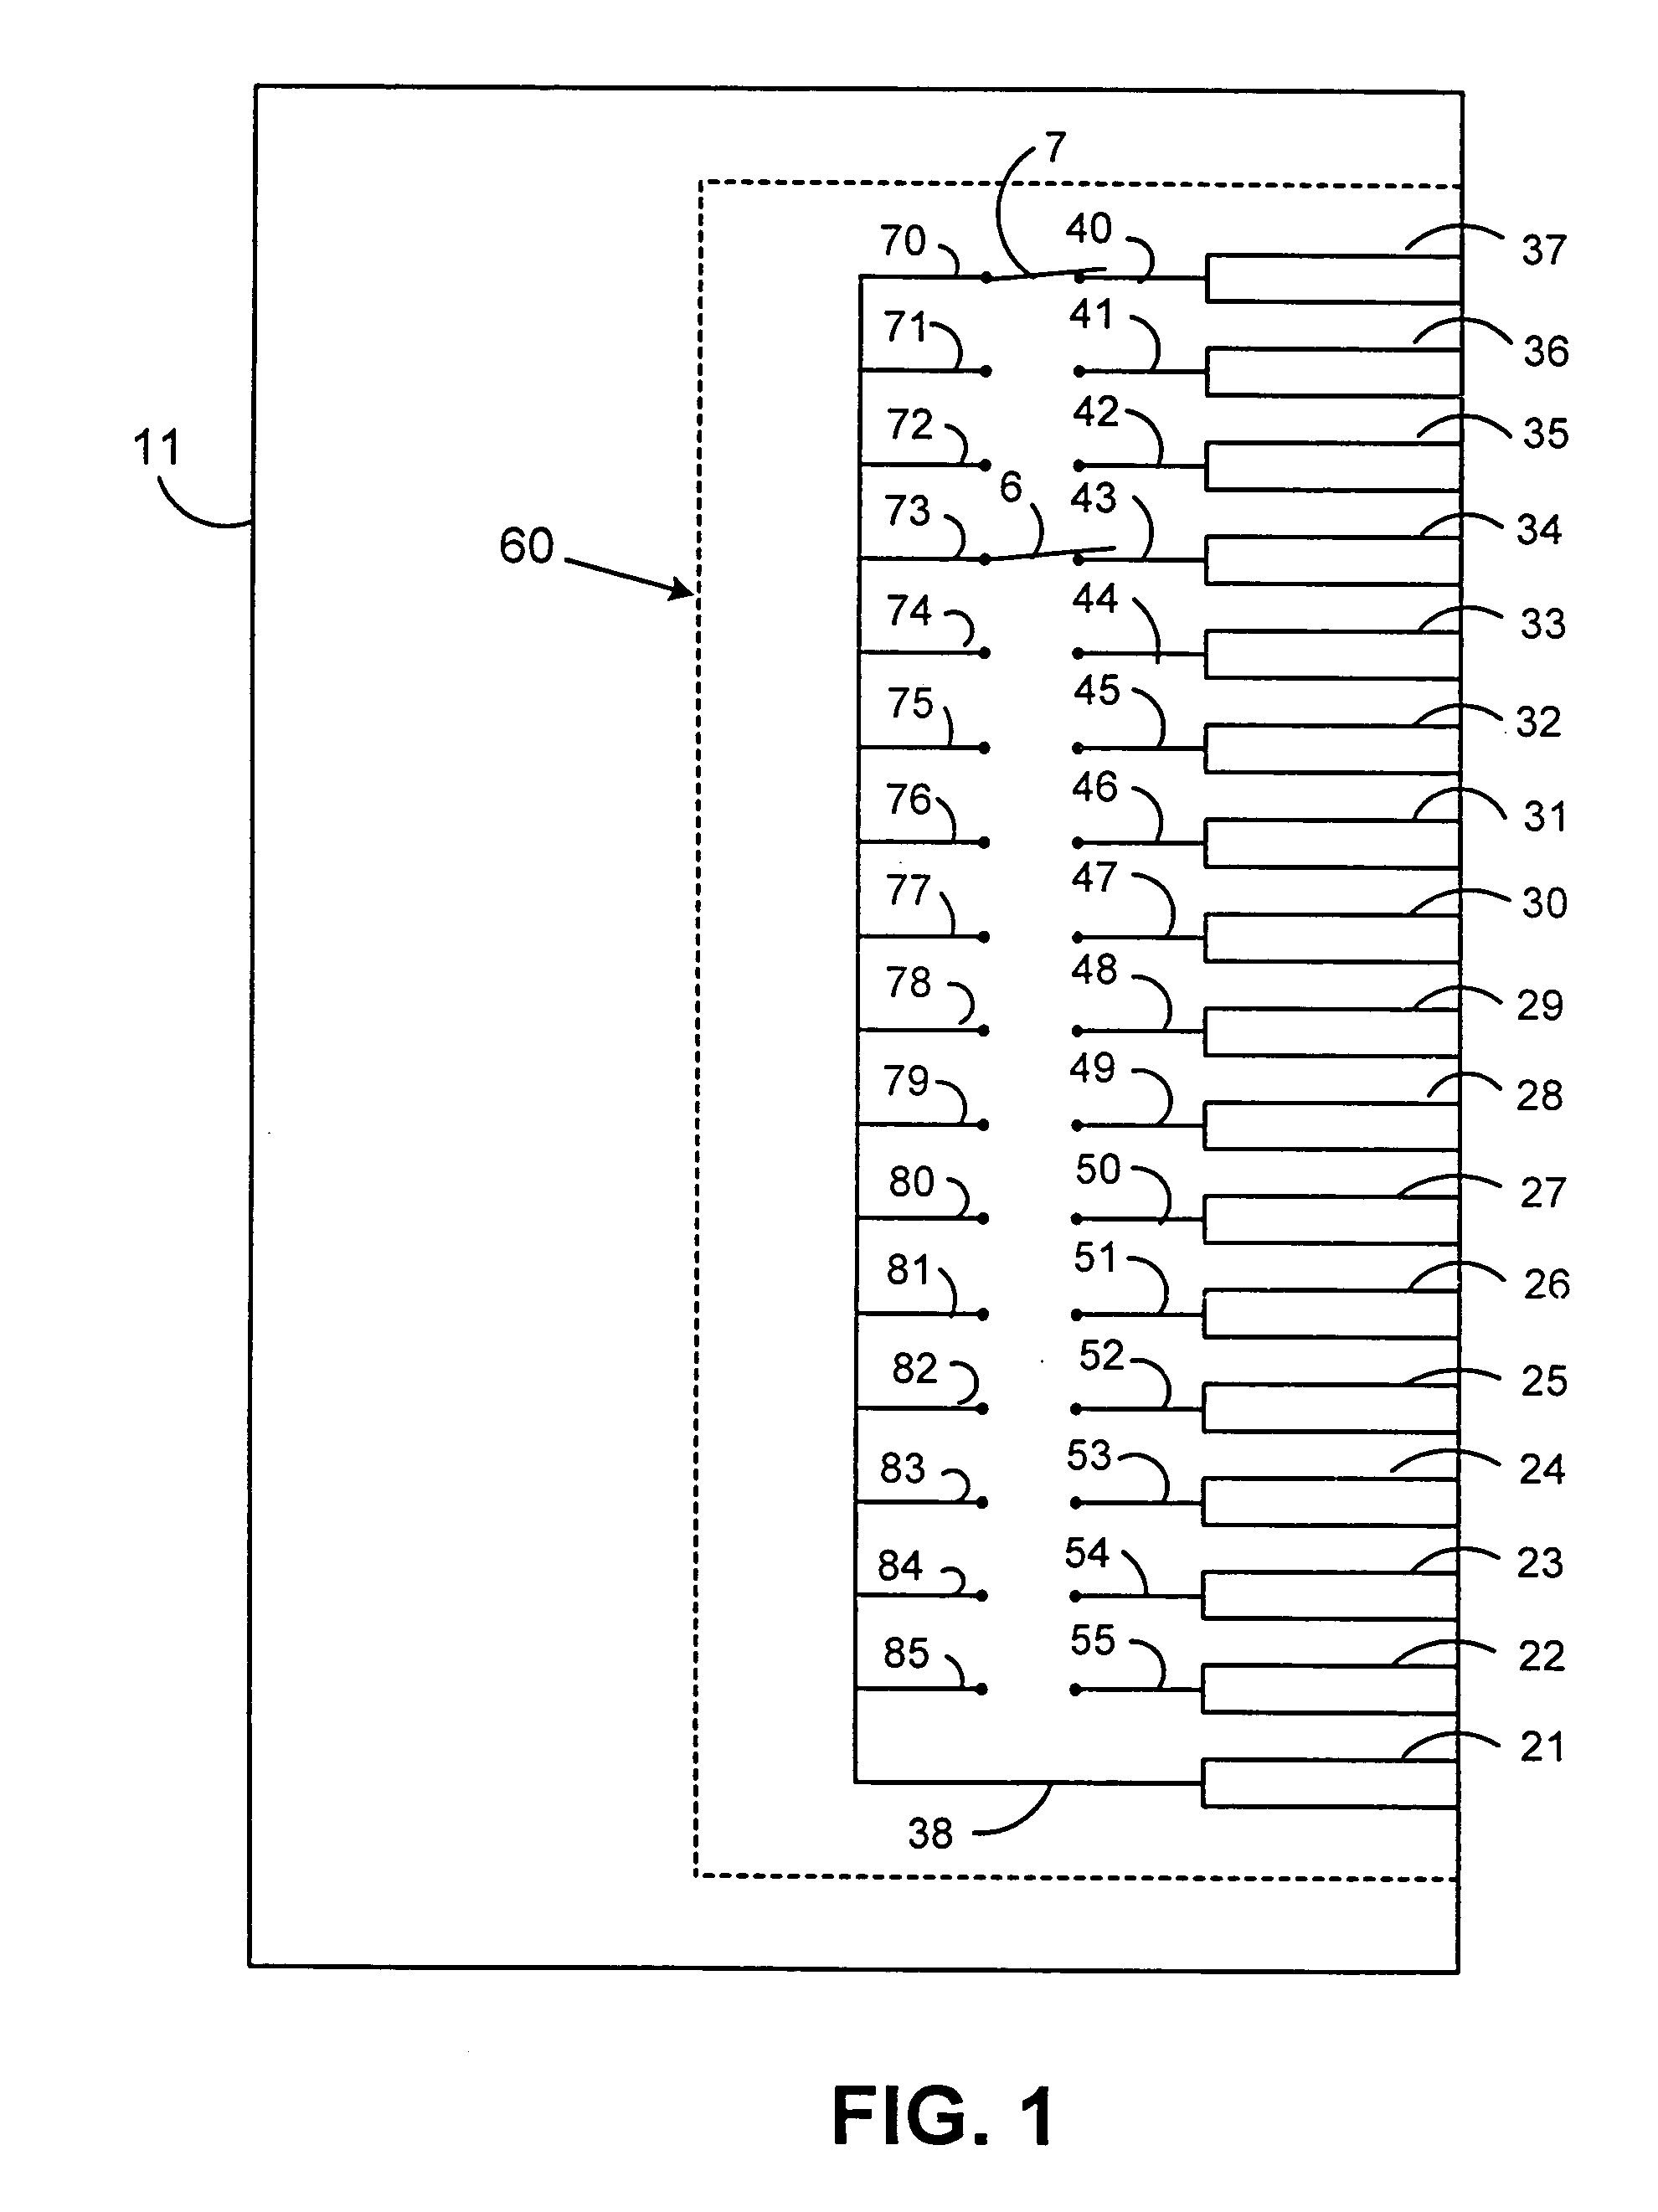 Method for a user to answer questions or queries using electrical contacts